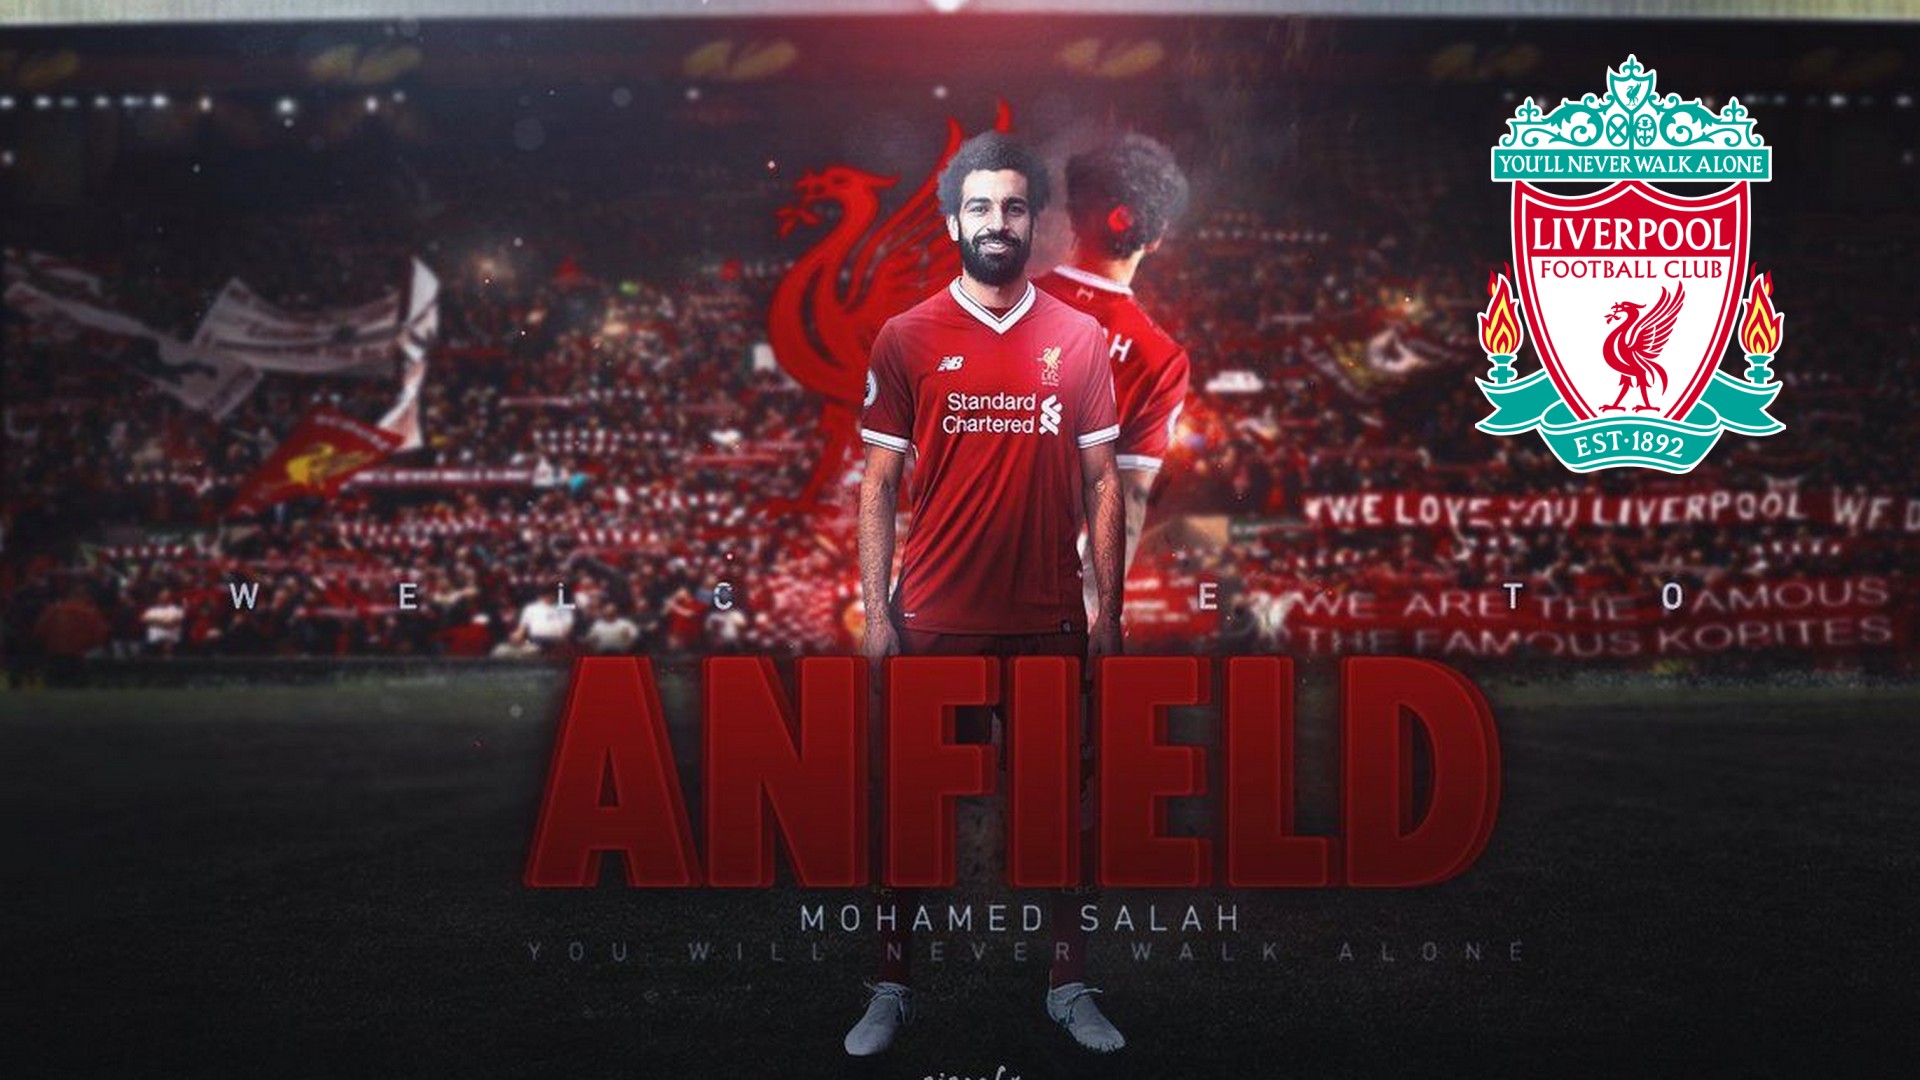 Wallpapers Computer Liverpool Mohamed Salah With Resolution 1920X1080 pixel. You can make this wallpaper for your Desktop Computer Backgrounds, Mac Wallpapers, Android Lock screen or iPhone Screensavers